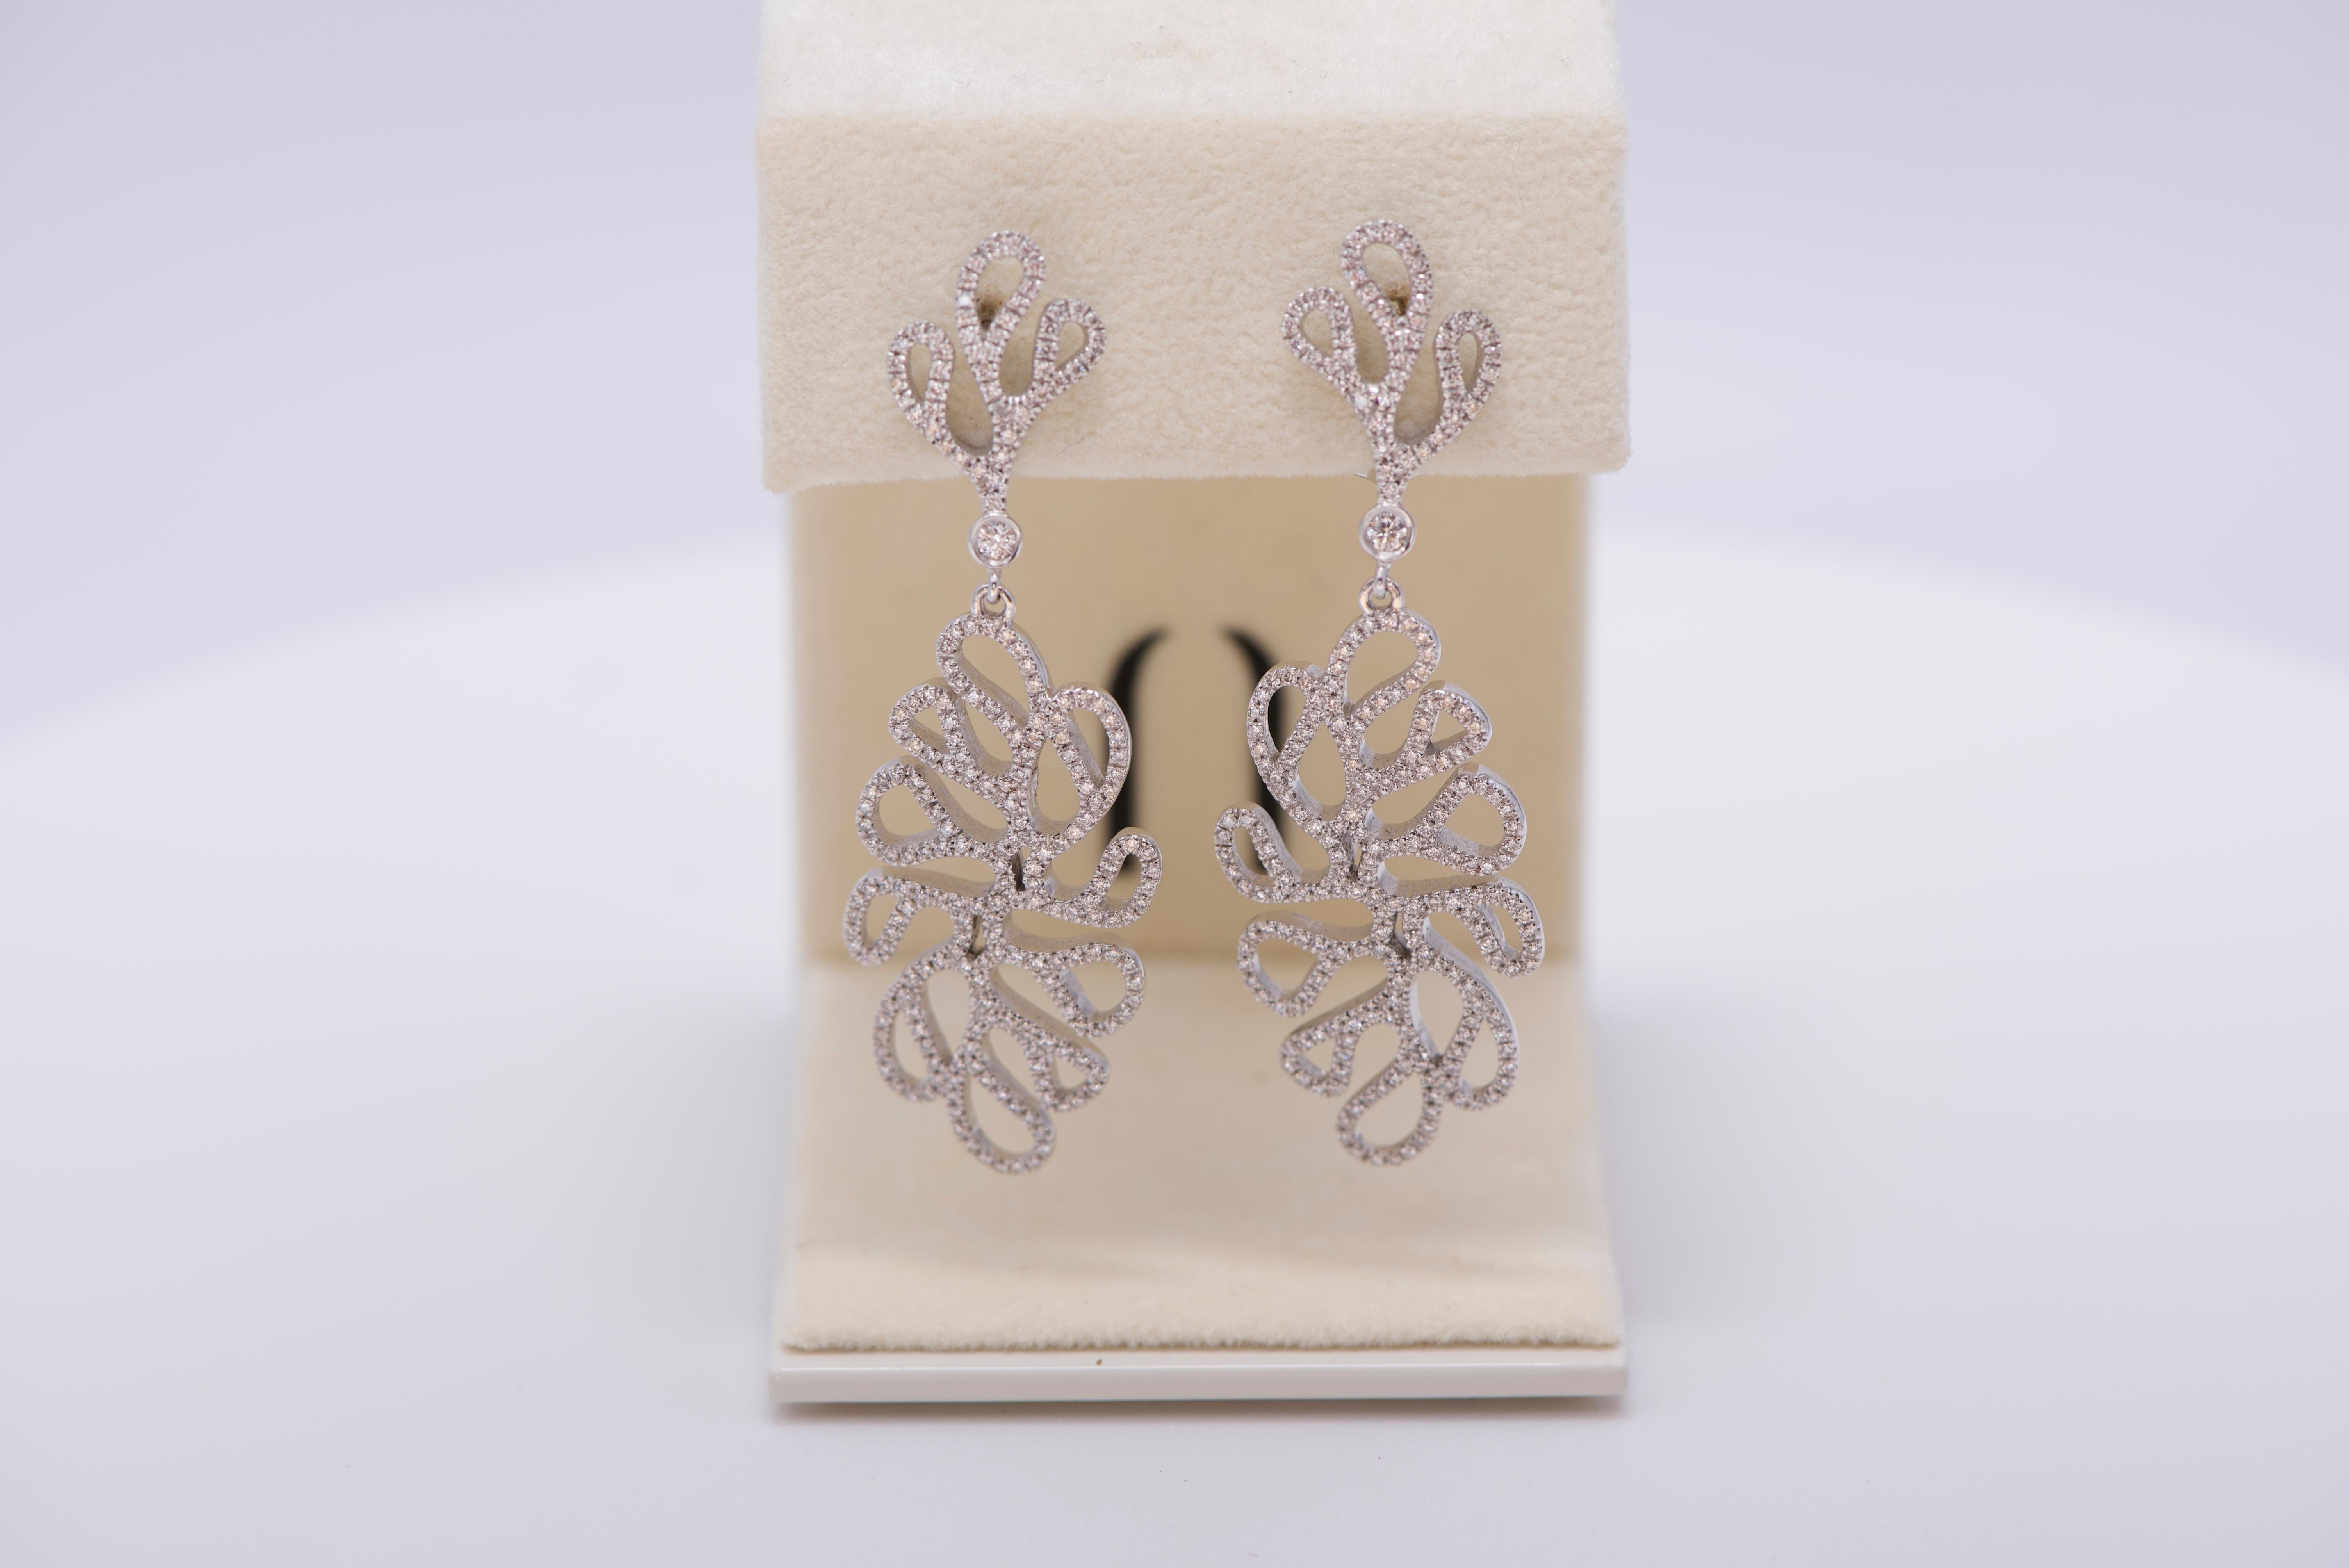 Earrings in 18K white gold with approximately 1.48 carats of diamonds from Miseno's Foglia di Mare, or Sea Leaf, collection. 